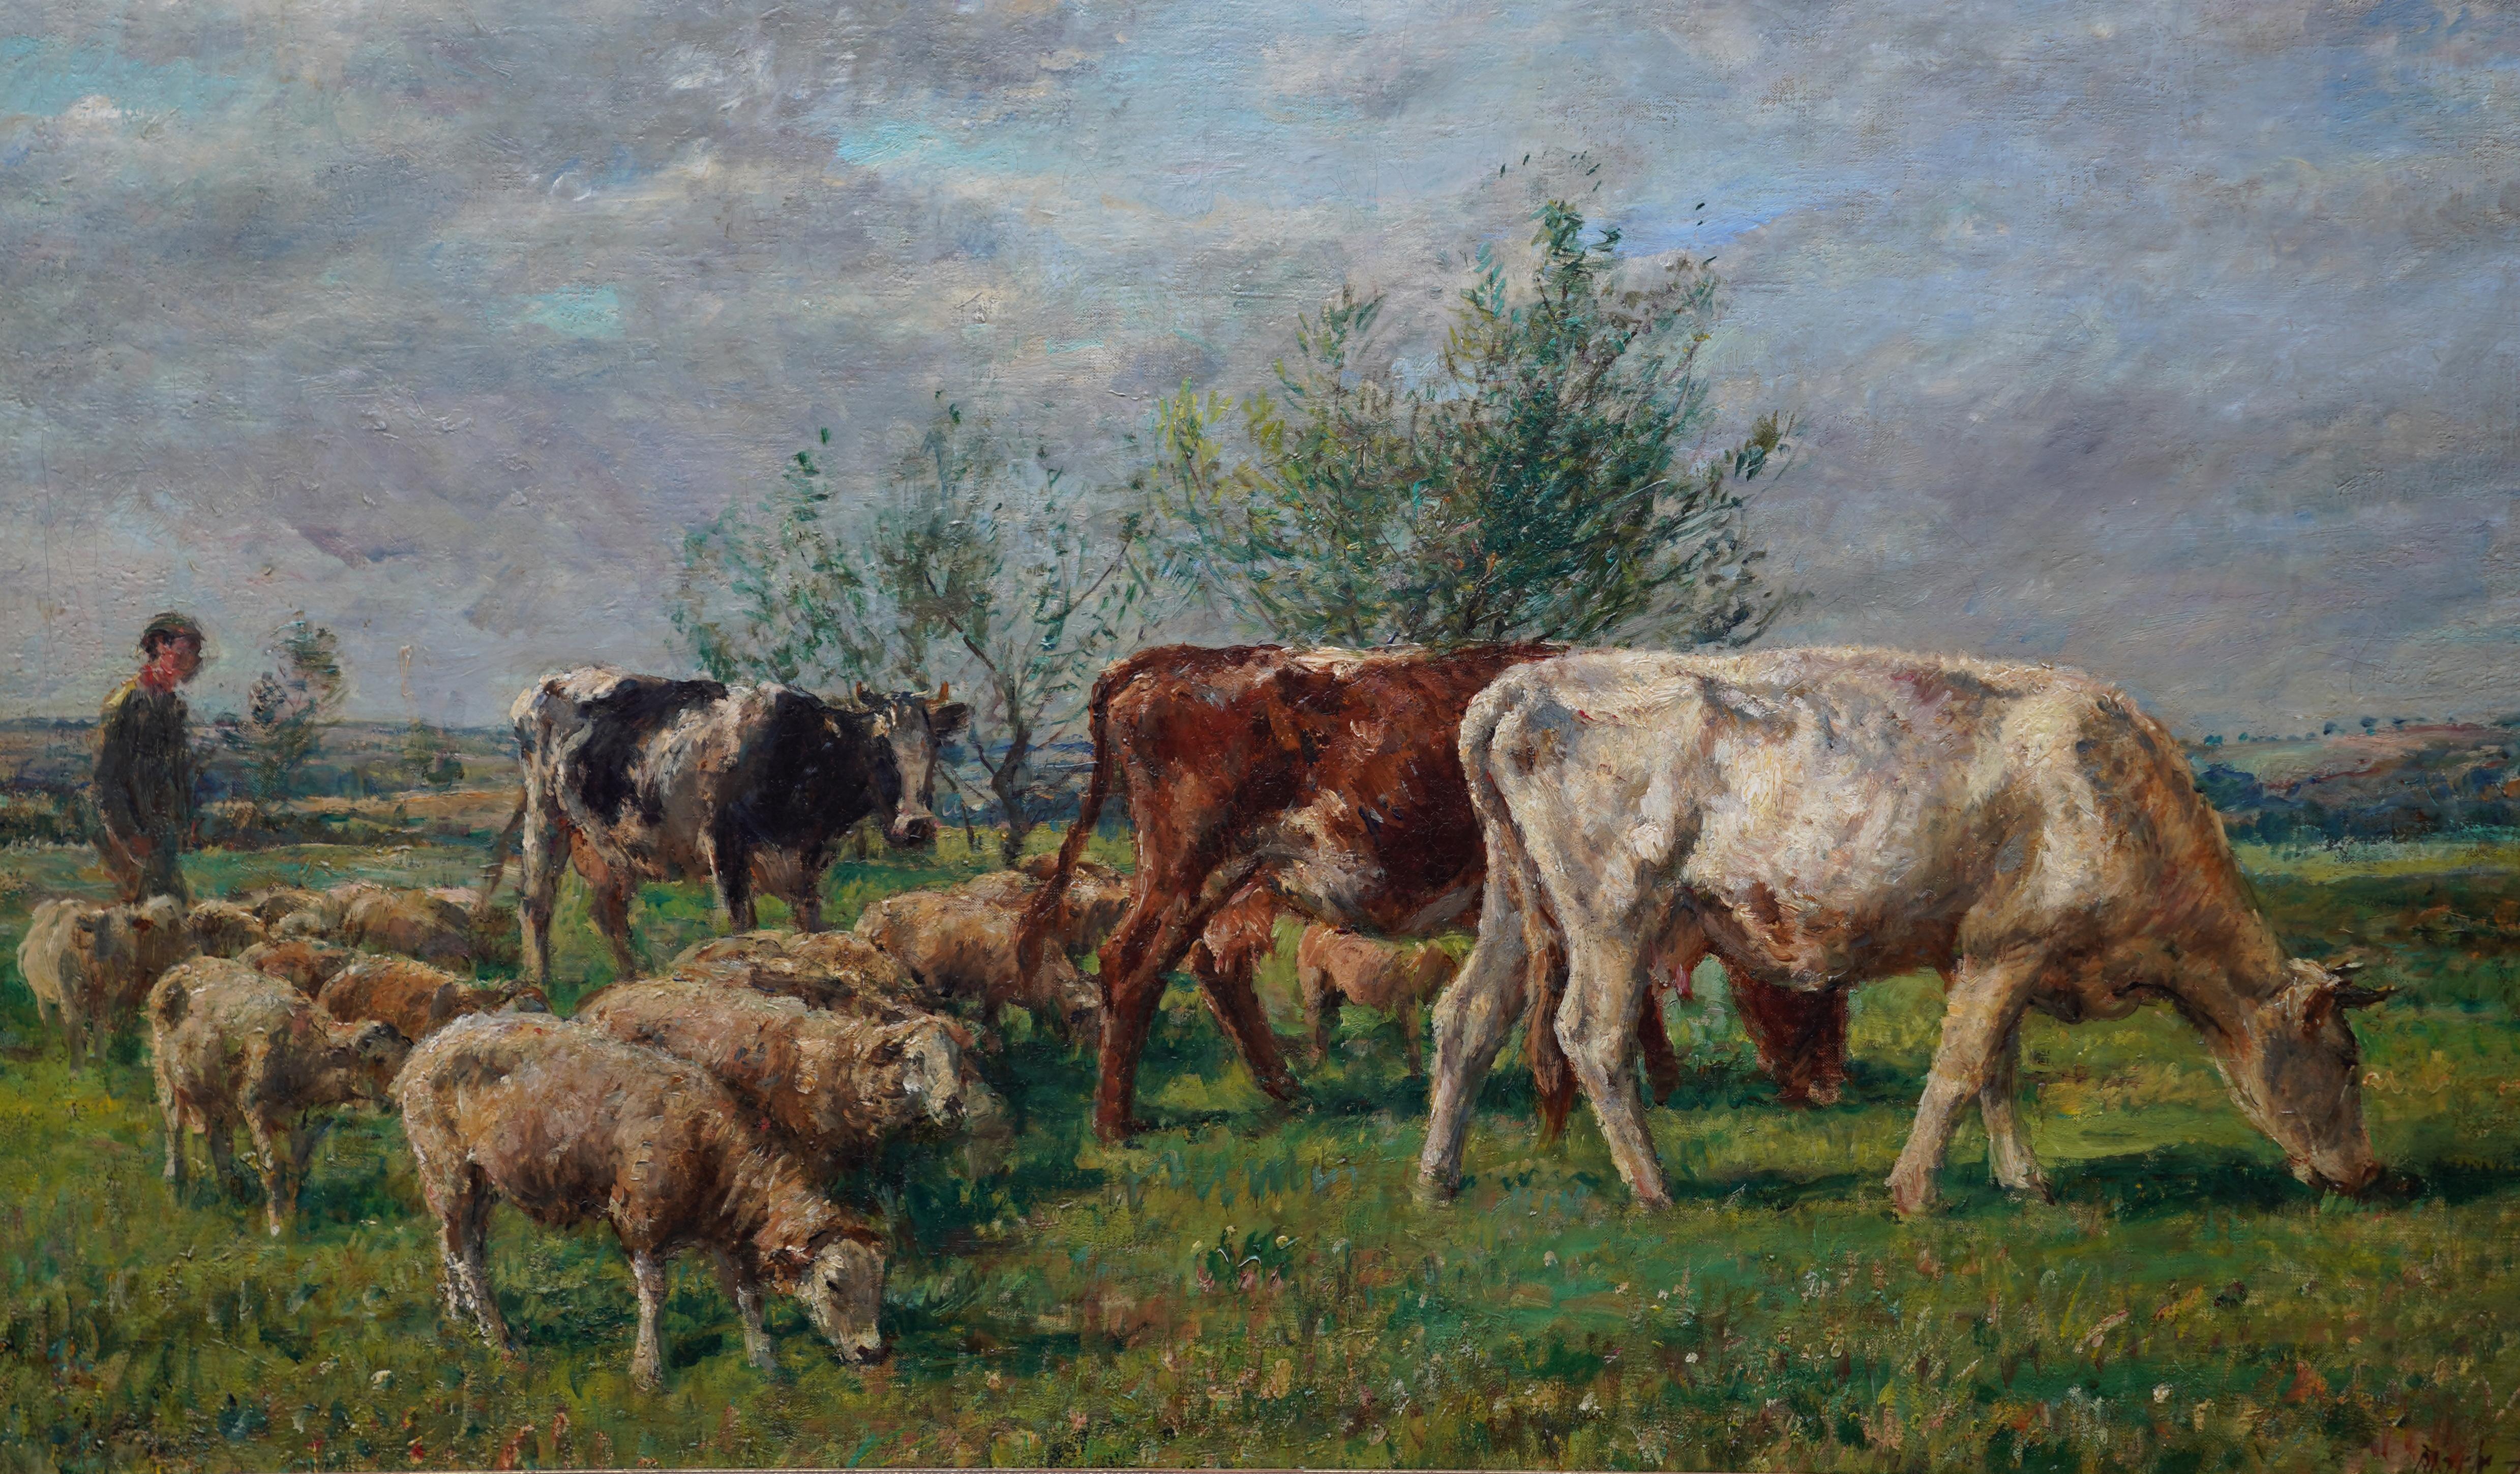 Landscape with Cattle and Sheep - British Victorian art Pastoral oil painting - Impressionist Painting by William Mark Fisher